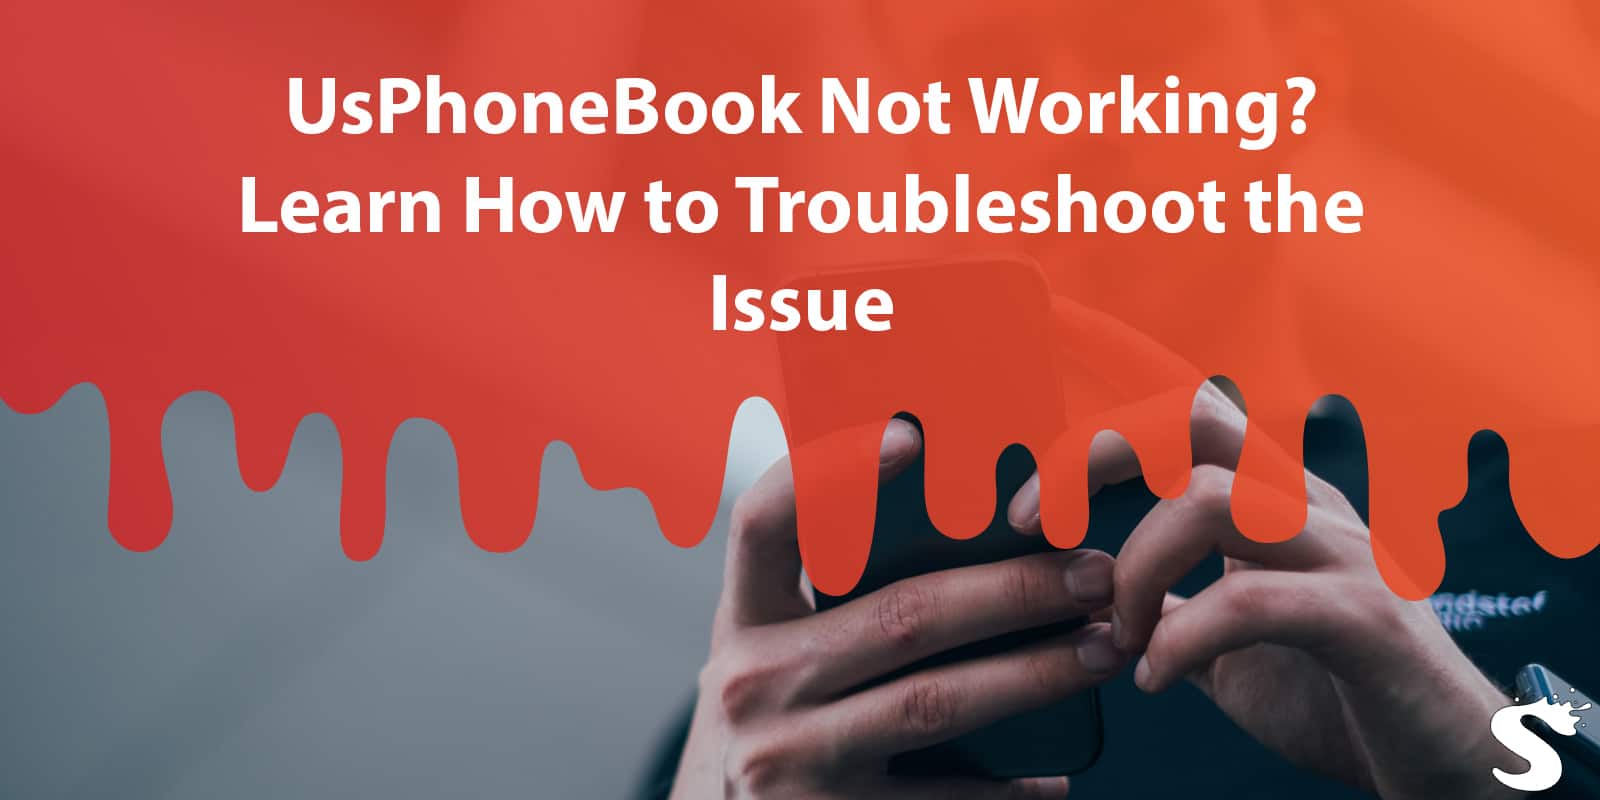 UsPhoneBook Not Working? Learn How to Troubleshoot the Issue